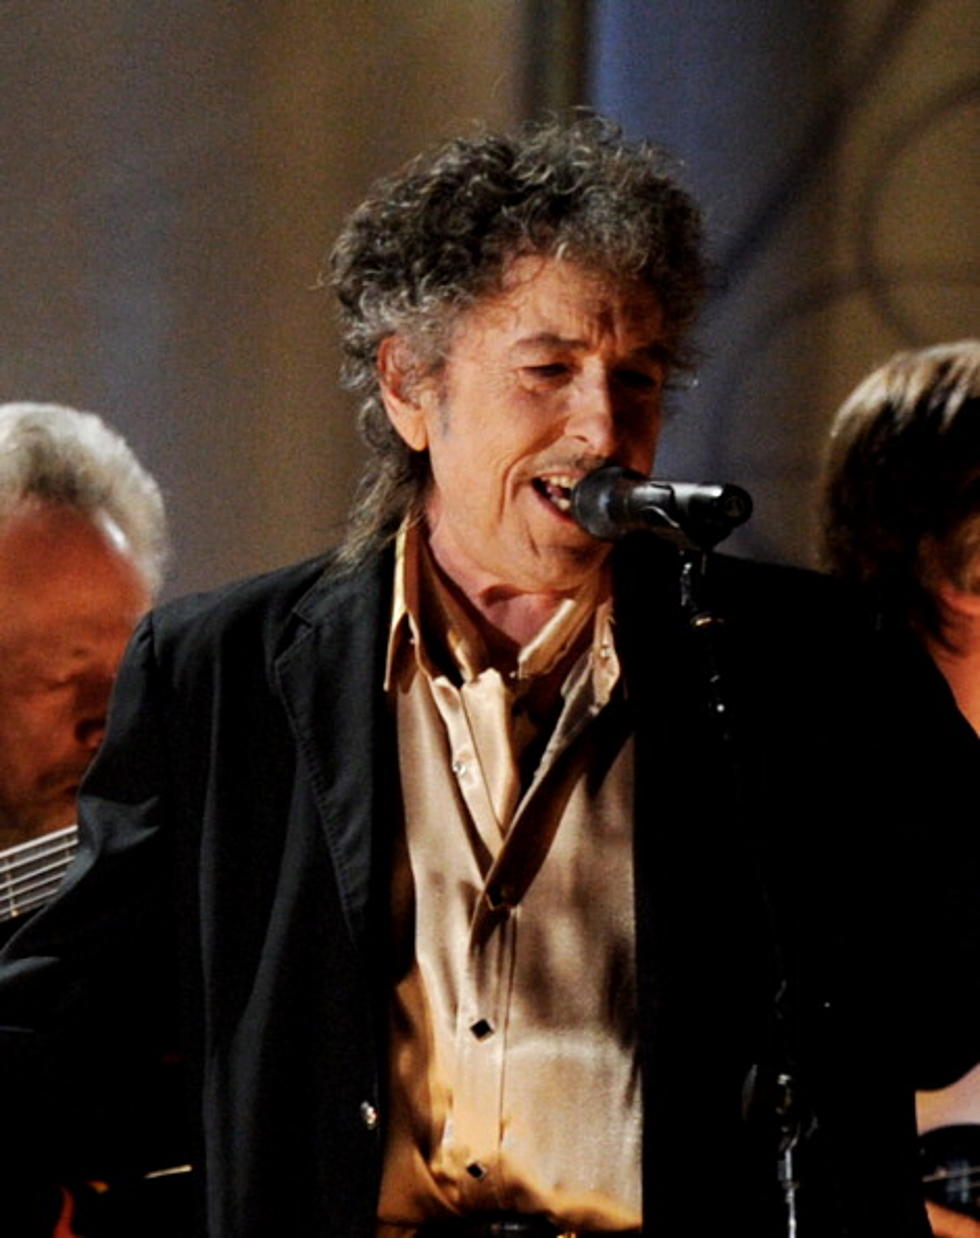 Interview Reveals Dylan Was Suicidal And Addicted